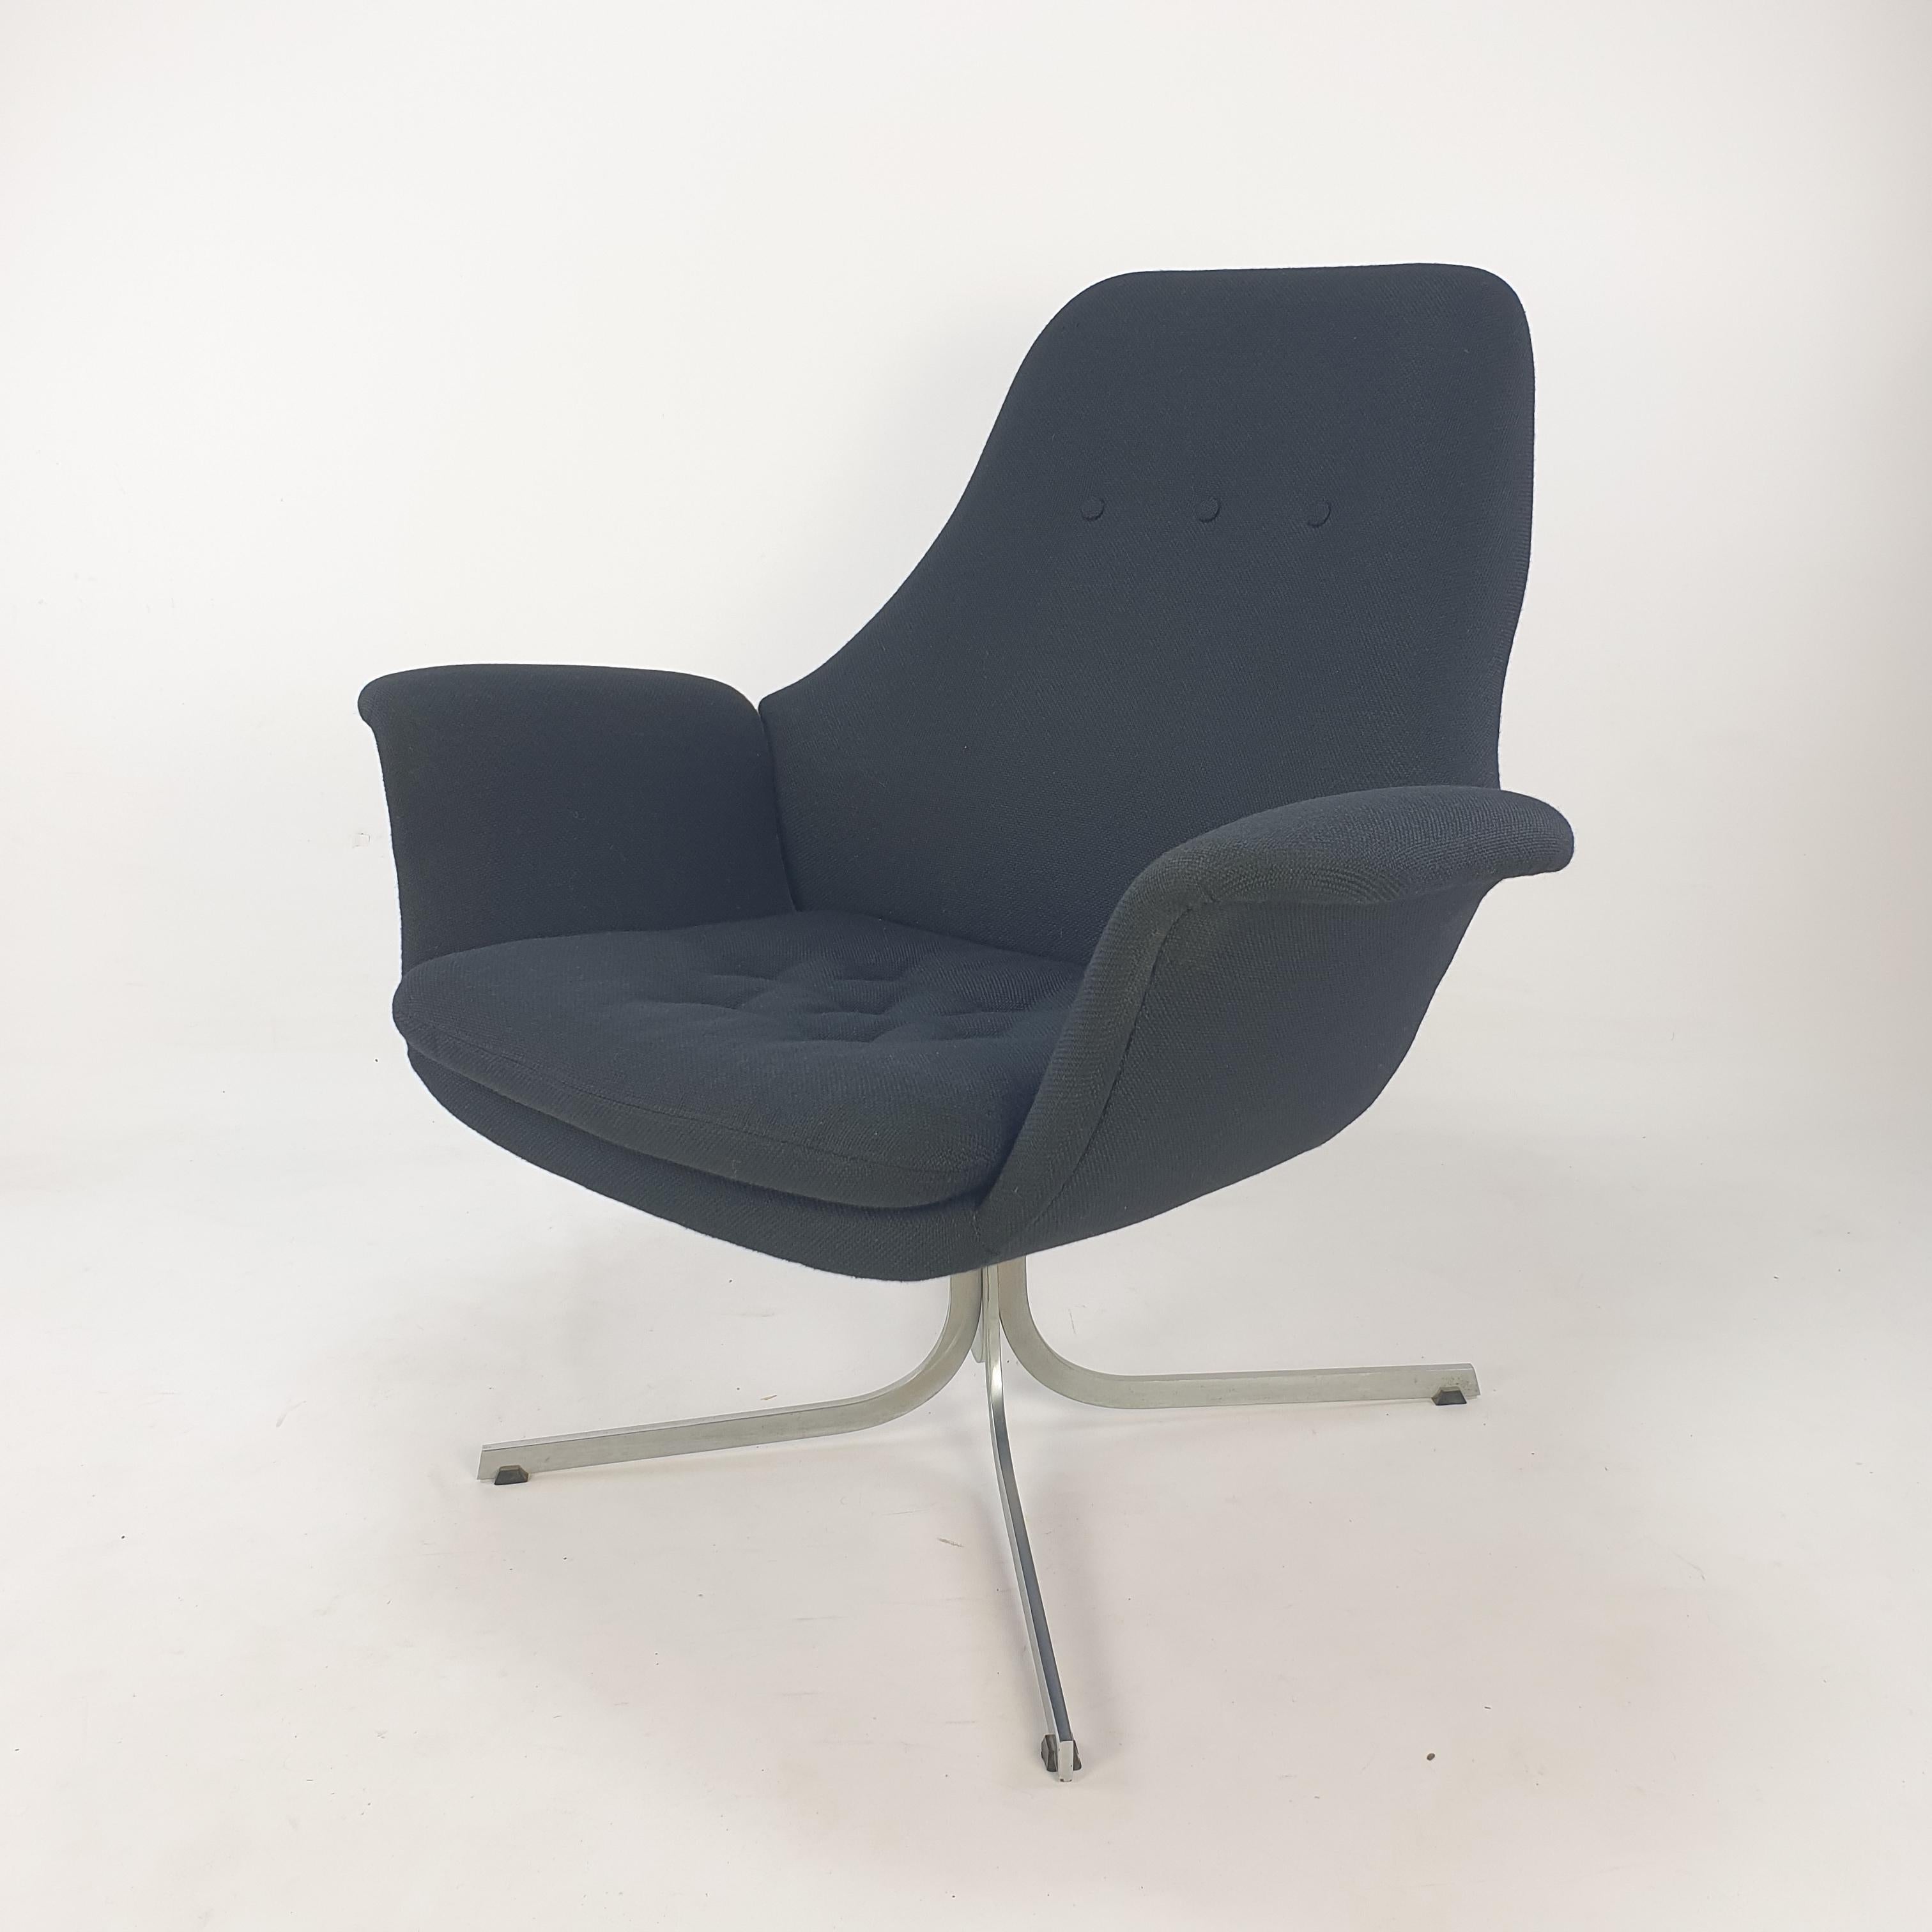 Extremely rare Big Tulip lounge chair, designed by Pierre Paulin for Artifort in 1960's. 
This comfortable chair is a not common but original Pierre Paulin model. 

It is upholstered some years ago with high quality wool fabric. 
The black fabric is